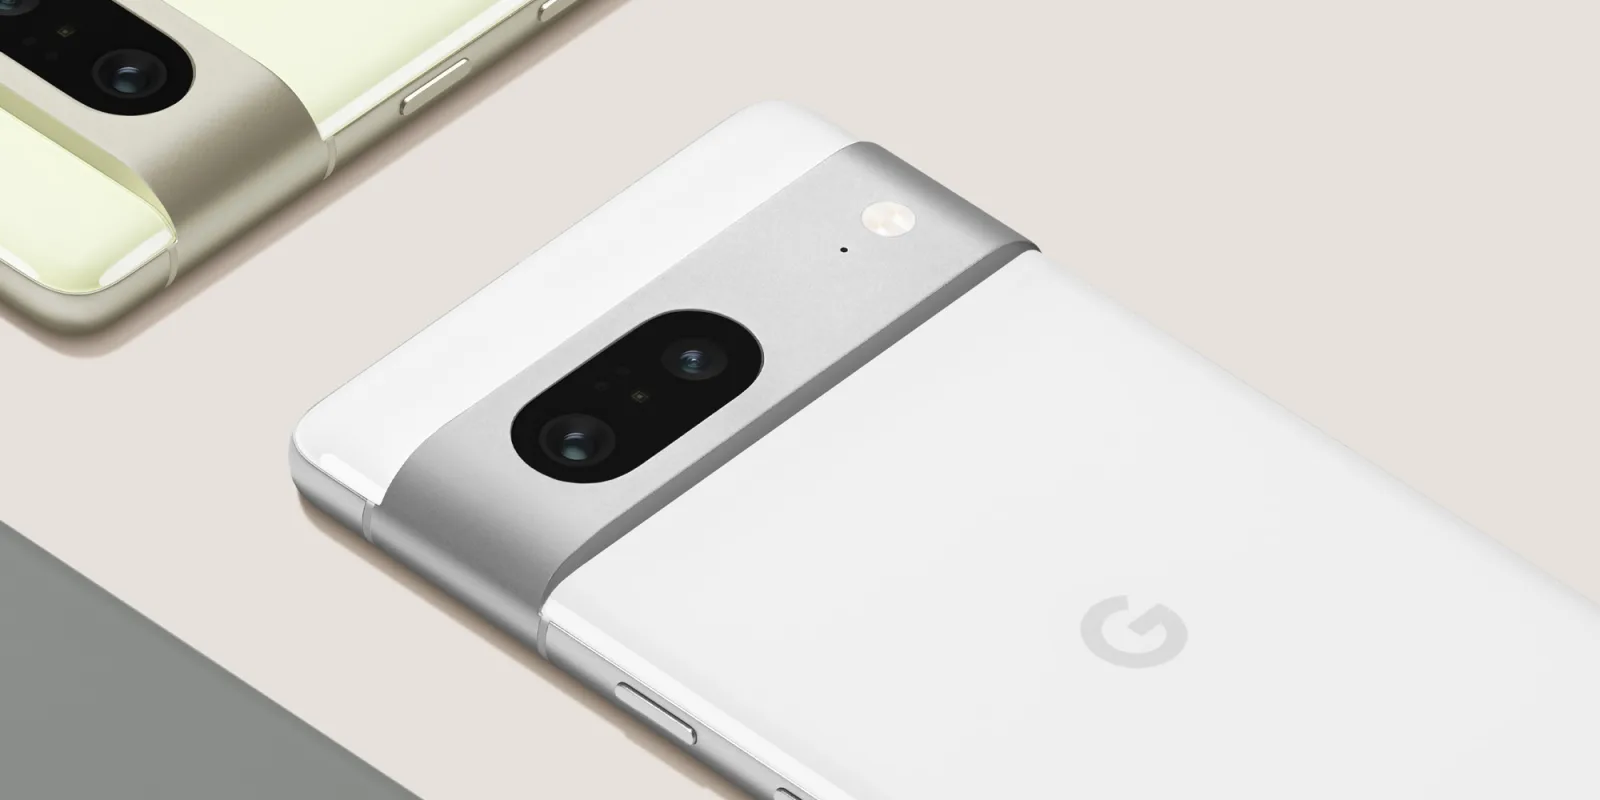 Google revealed the design of the Pixel 7 device in a new teaser